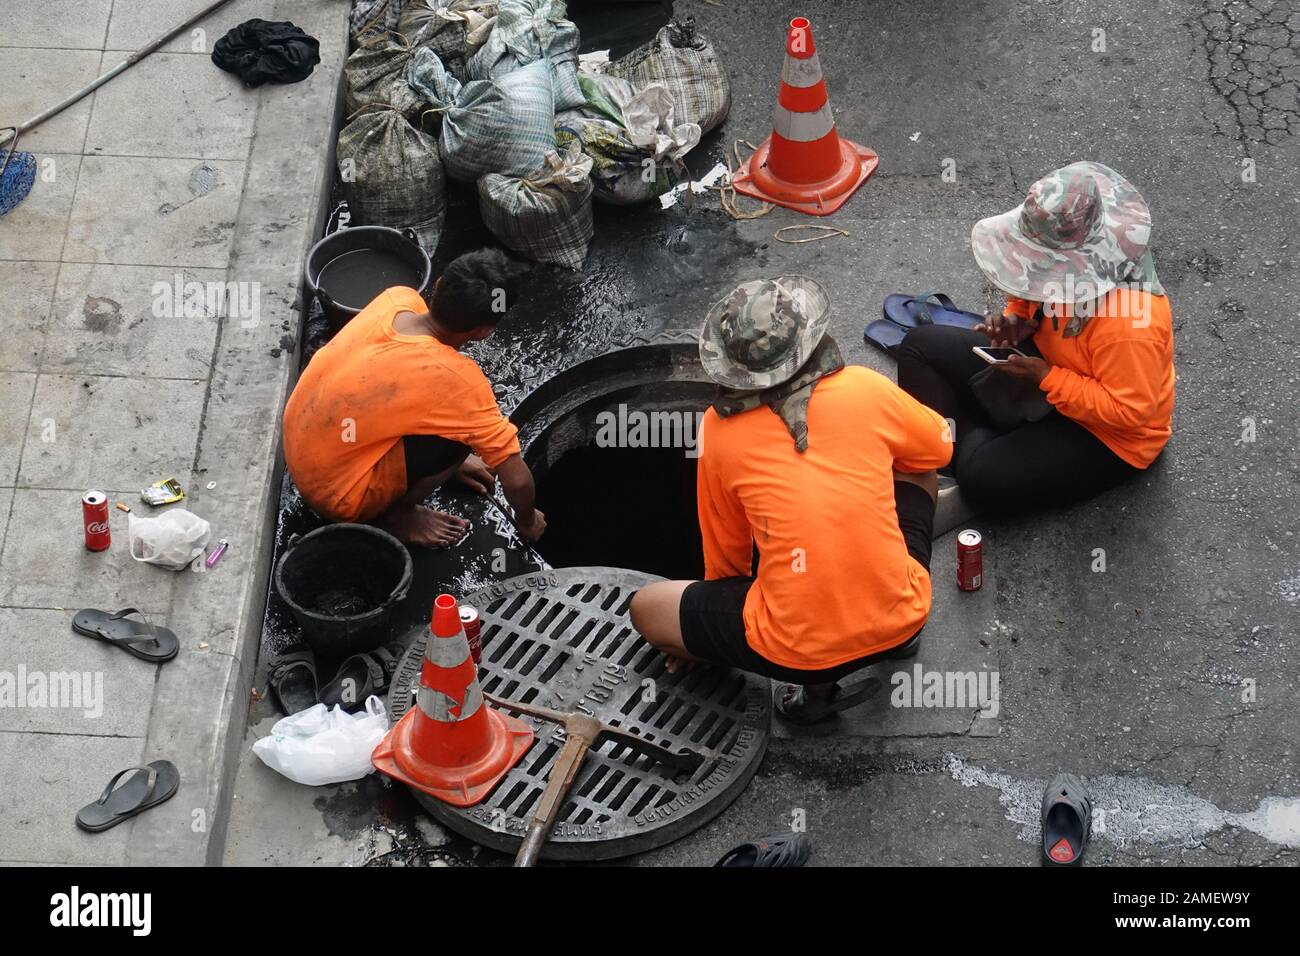 Bangkok, Thailand - December 21, 2019: Workers cleaning sewer with buckets and scoop net to waste bags. One worker using a phone. Stock Photo